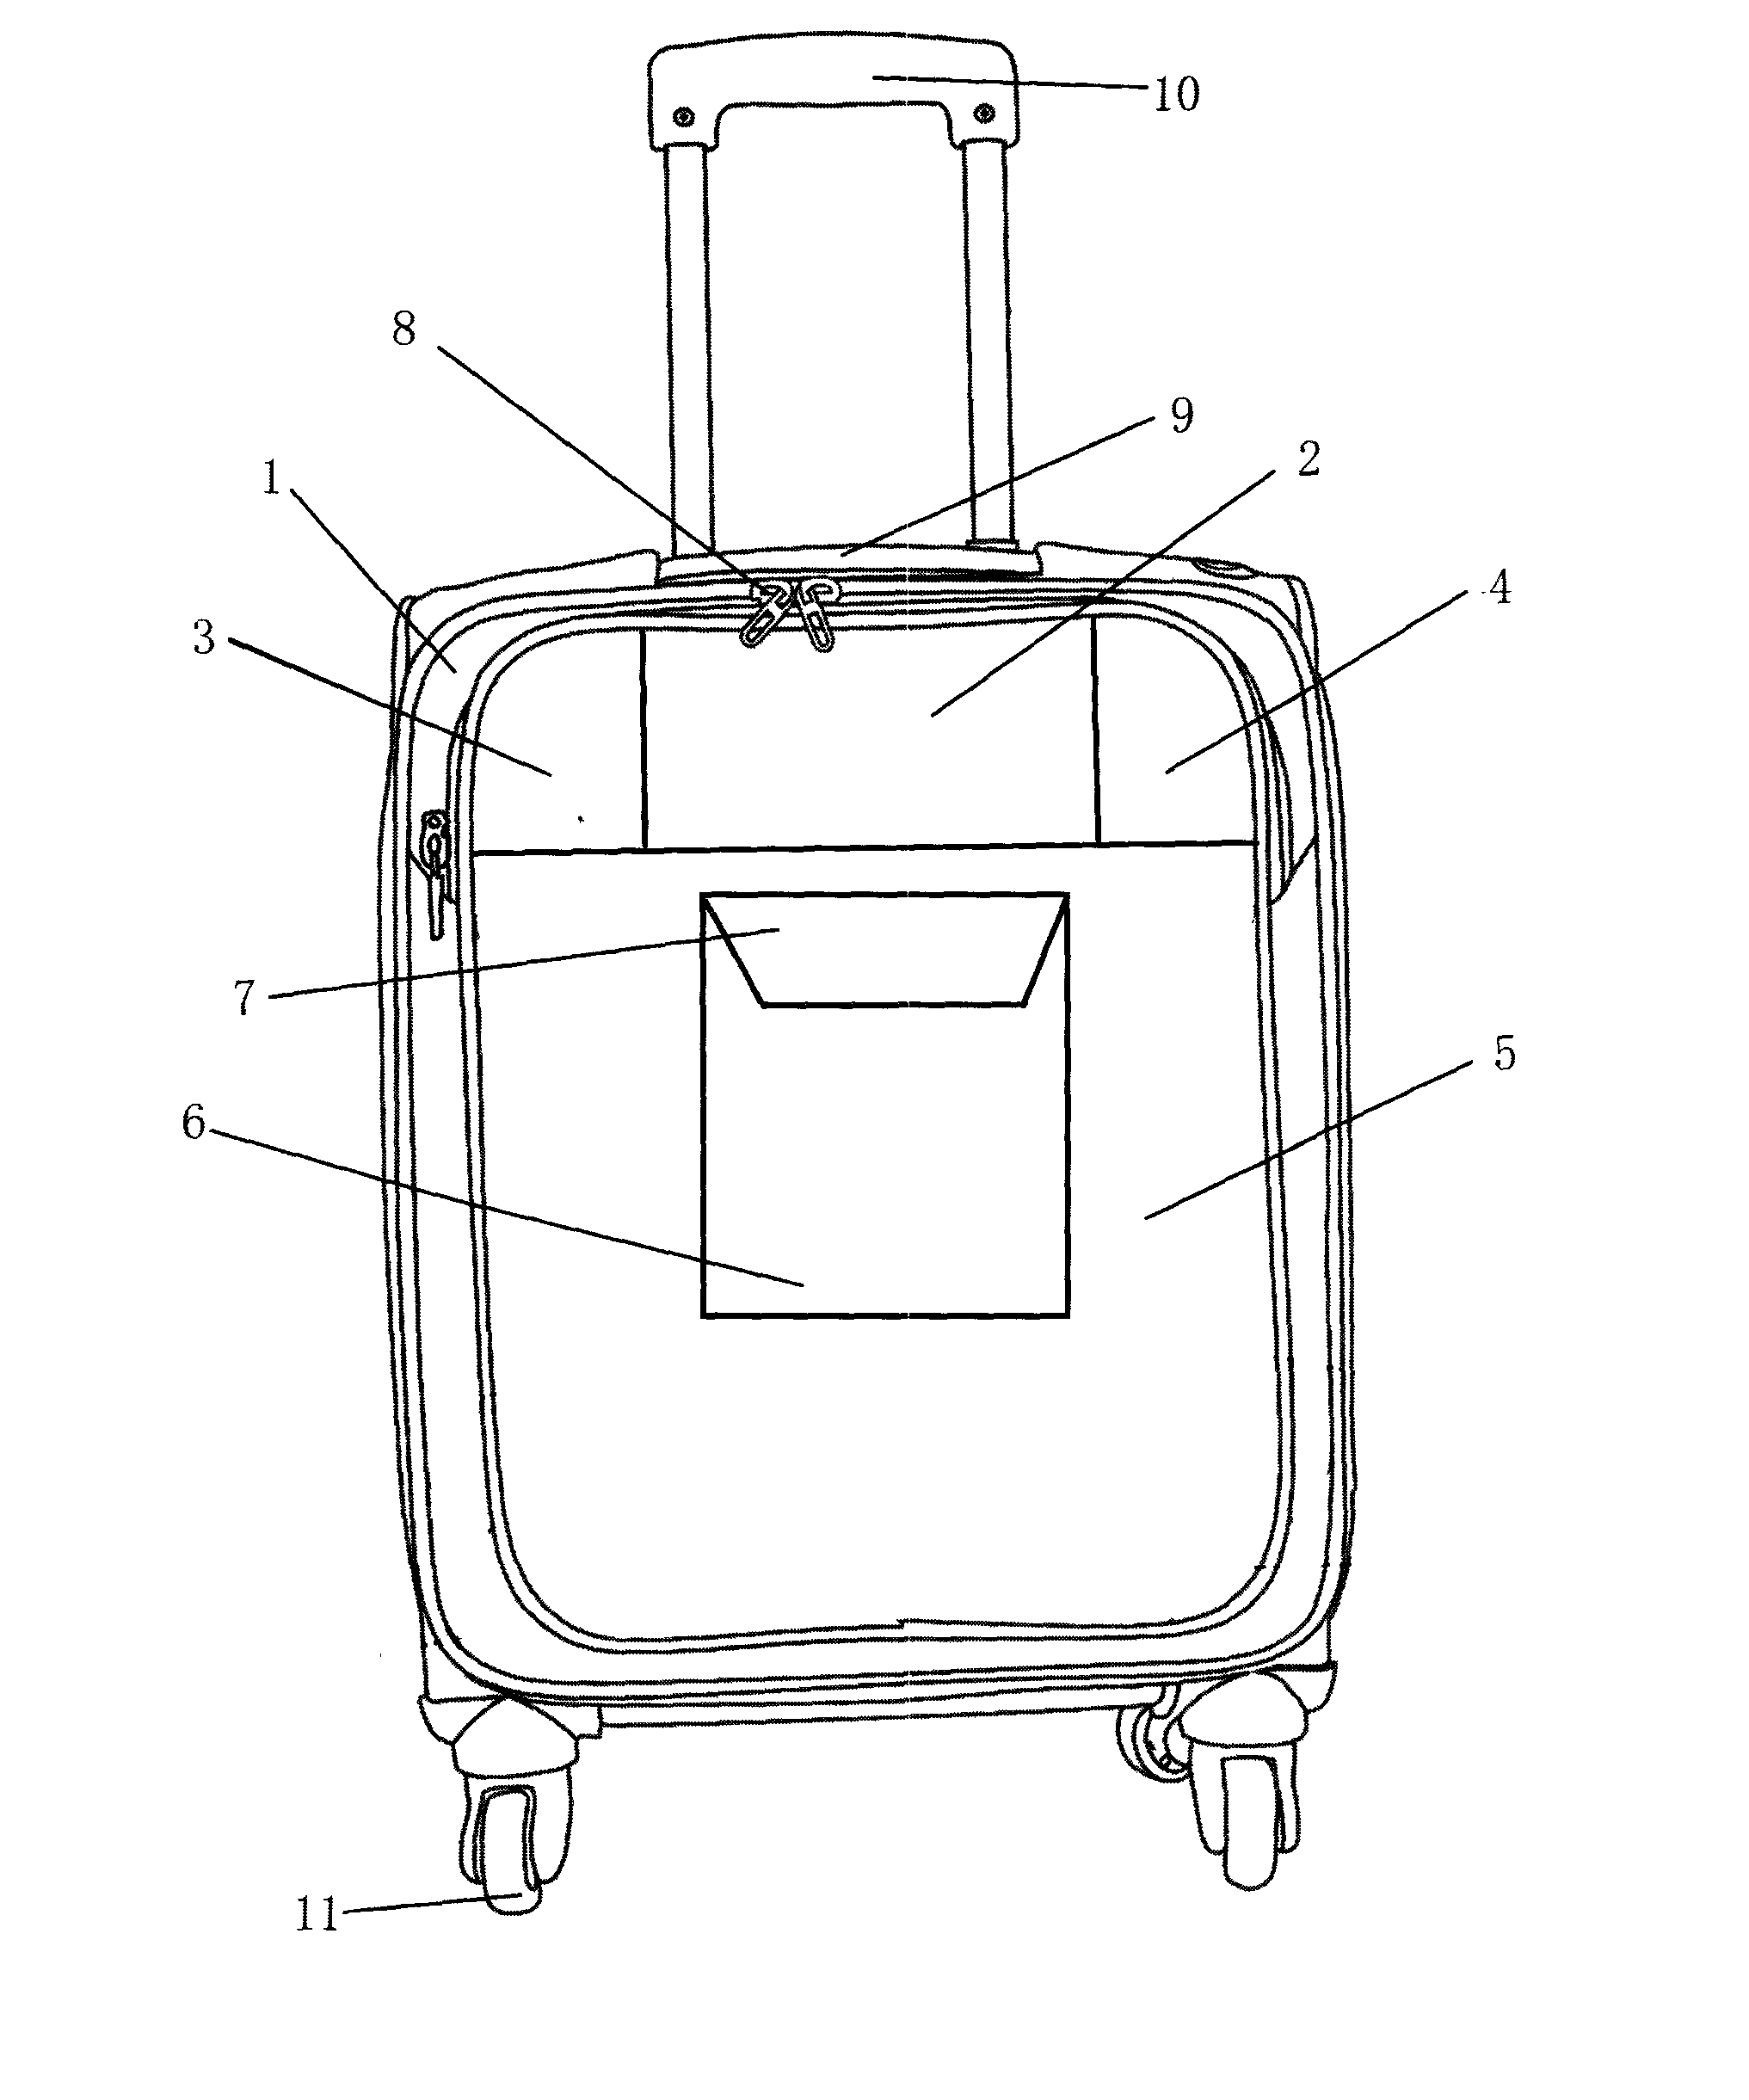 Draw-bar box with open pocket